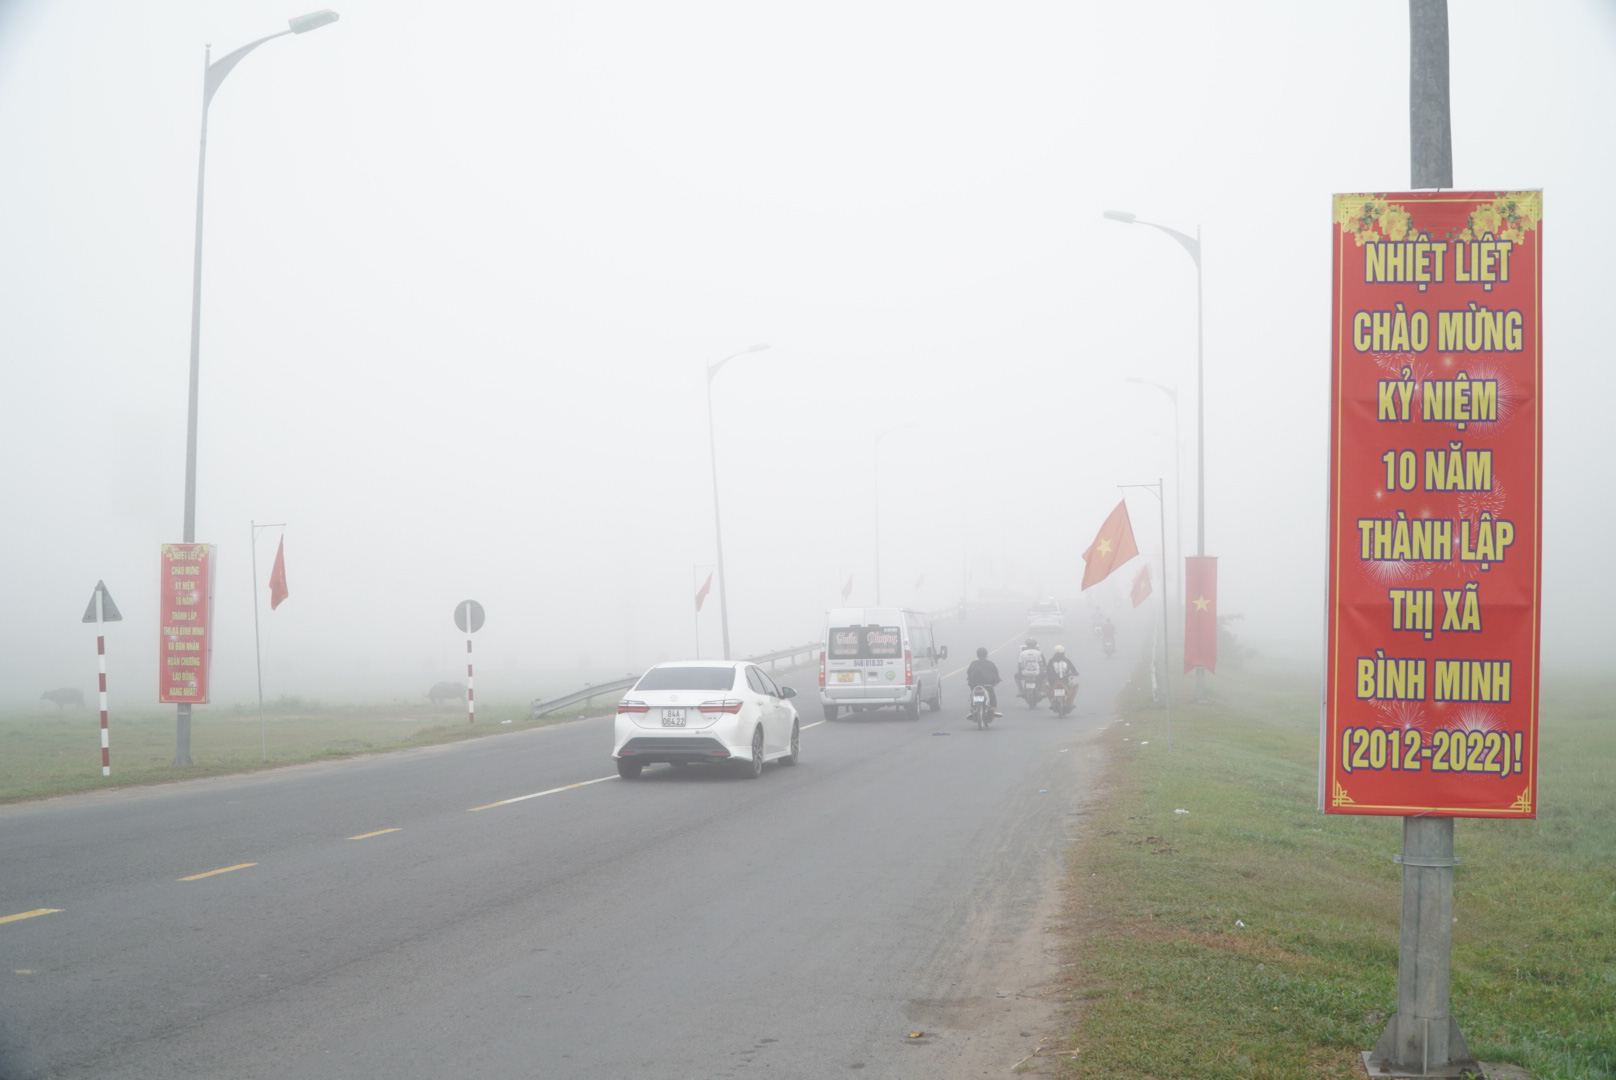 Fog covers Binh Minh Town in Vinh Long Province, Vietnam, January 16, 2022. Photo: Chi Hanh / Tuoi Tre